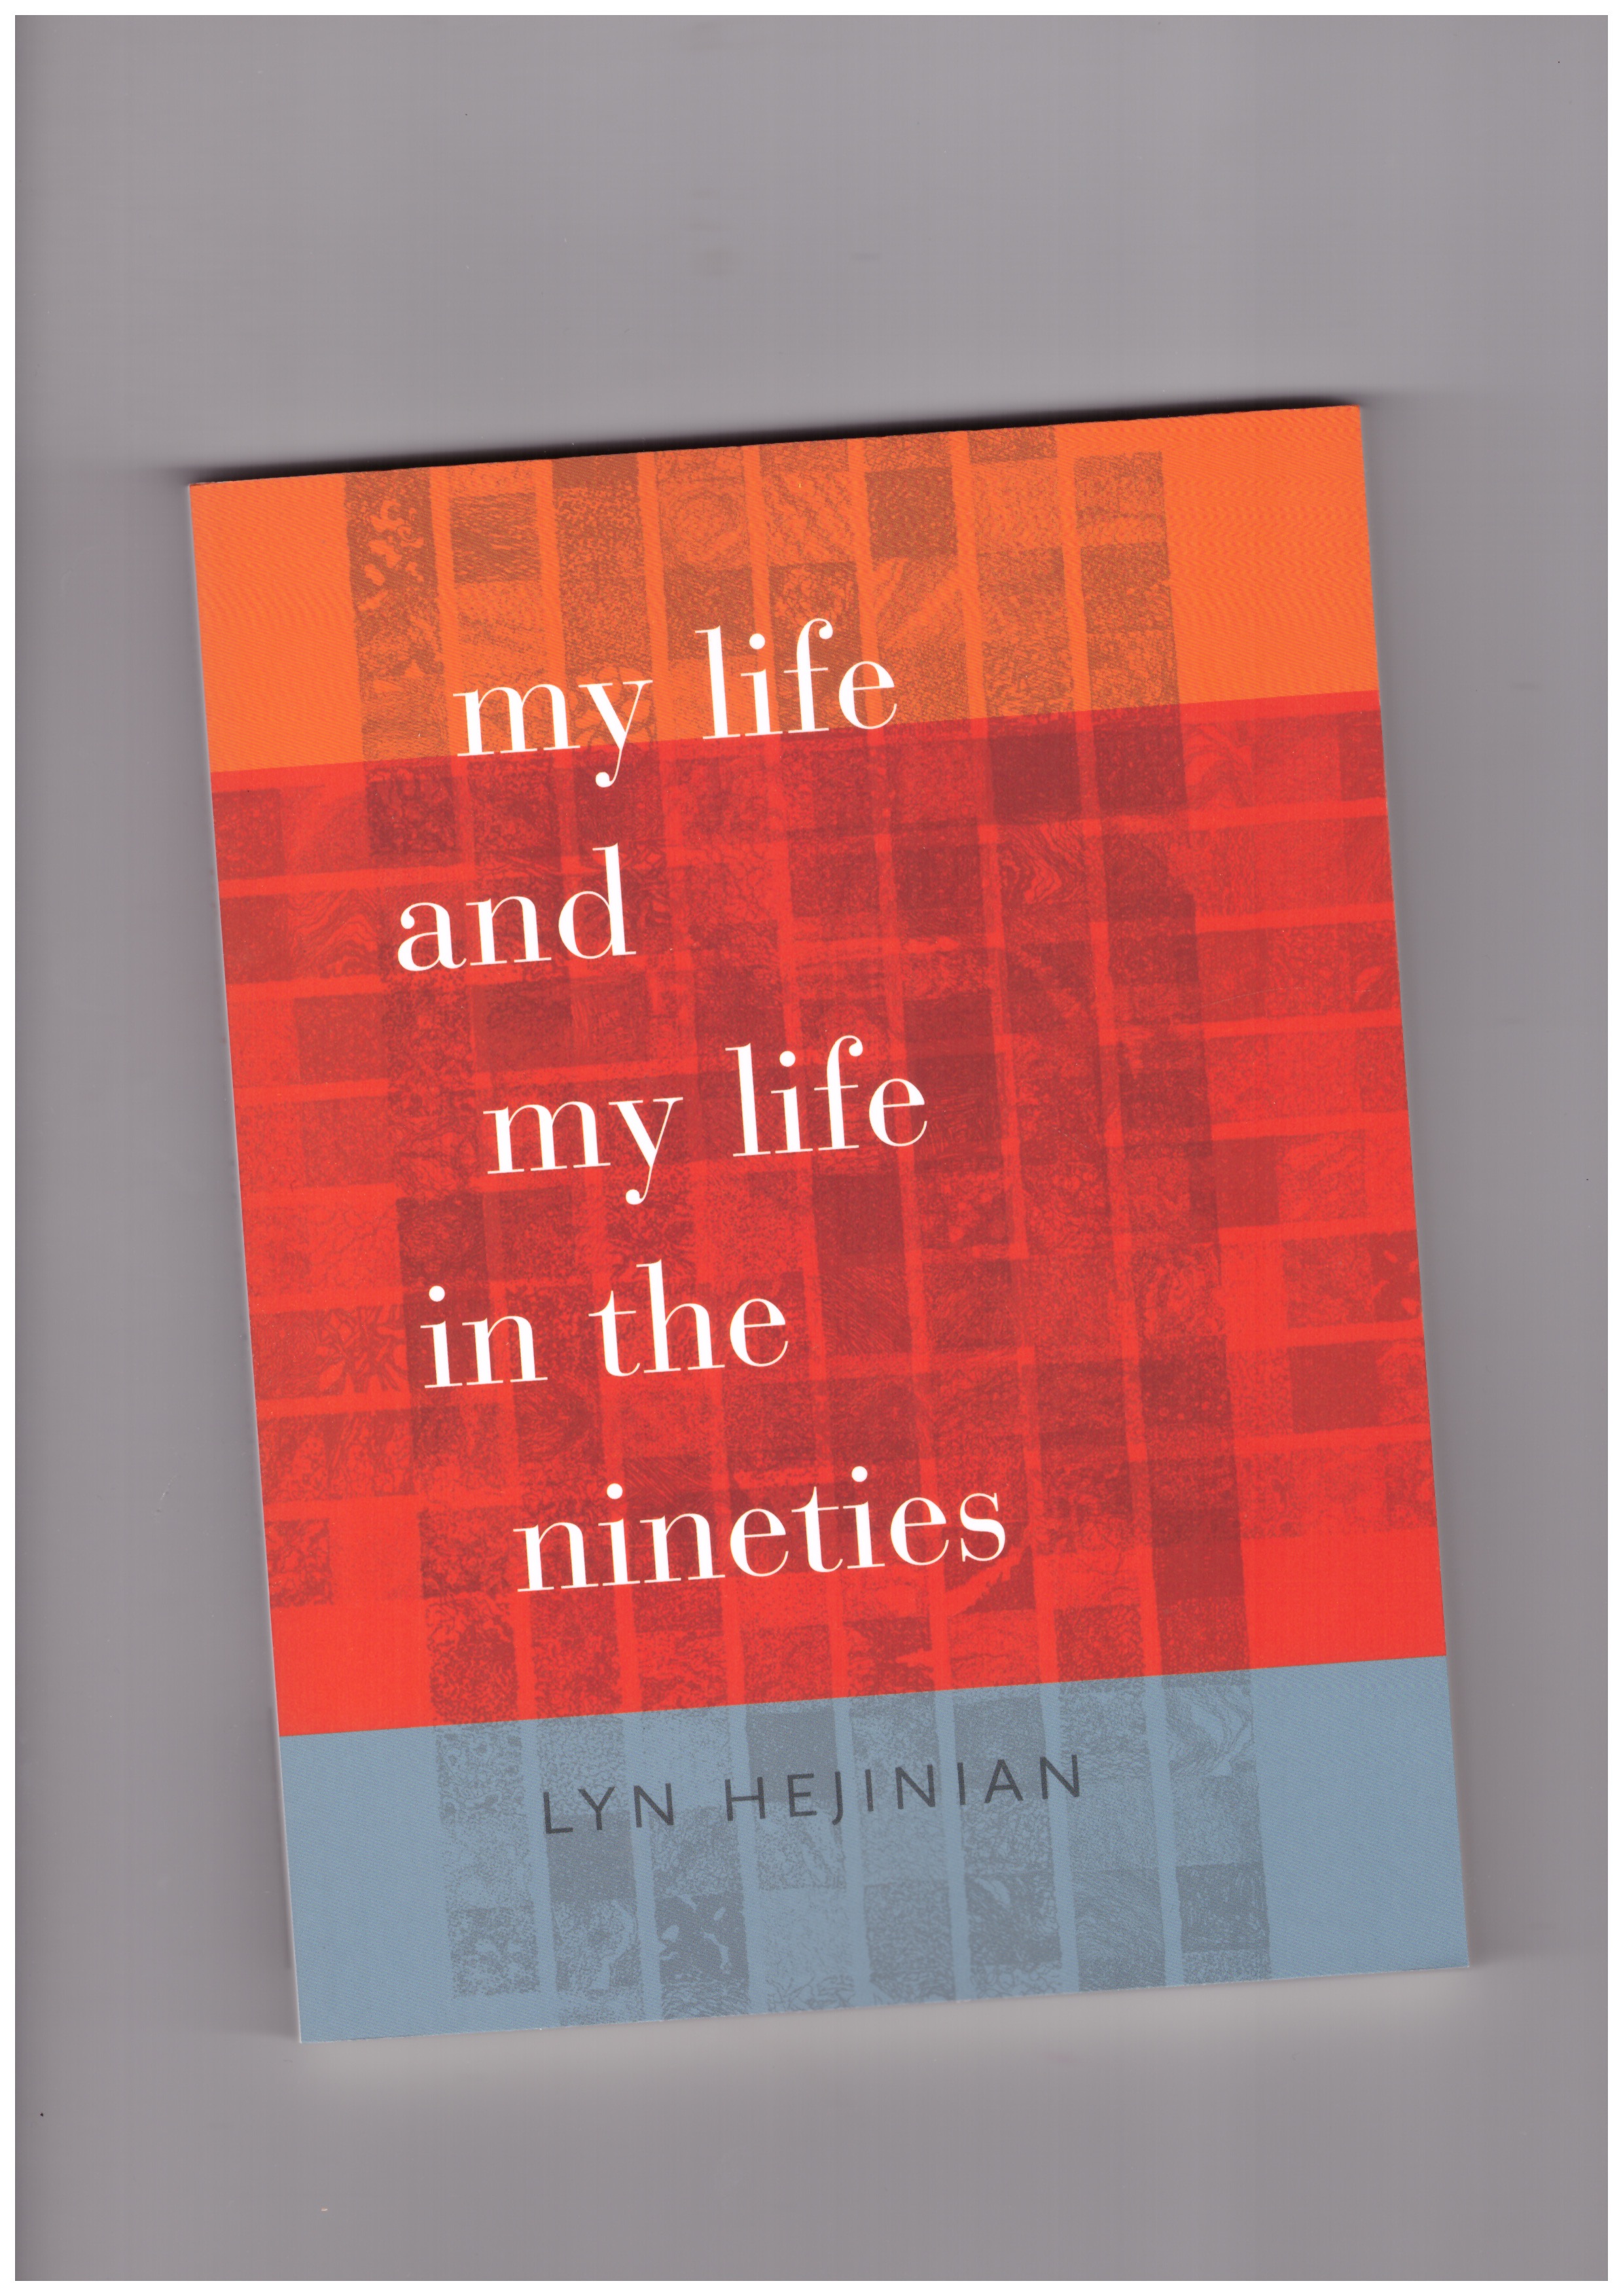 HEJINIAN, Lyn - My Life and My Life in the Nineties